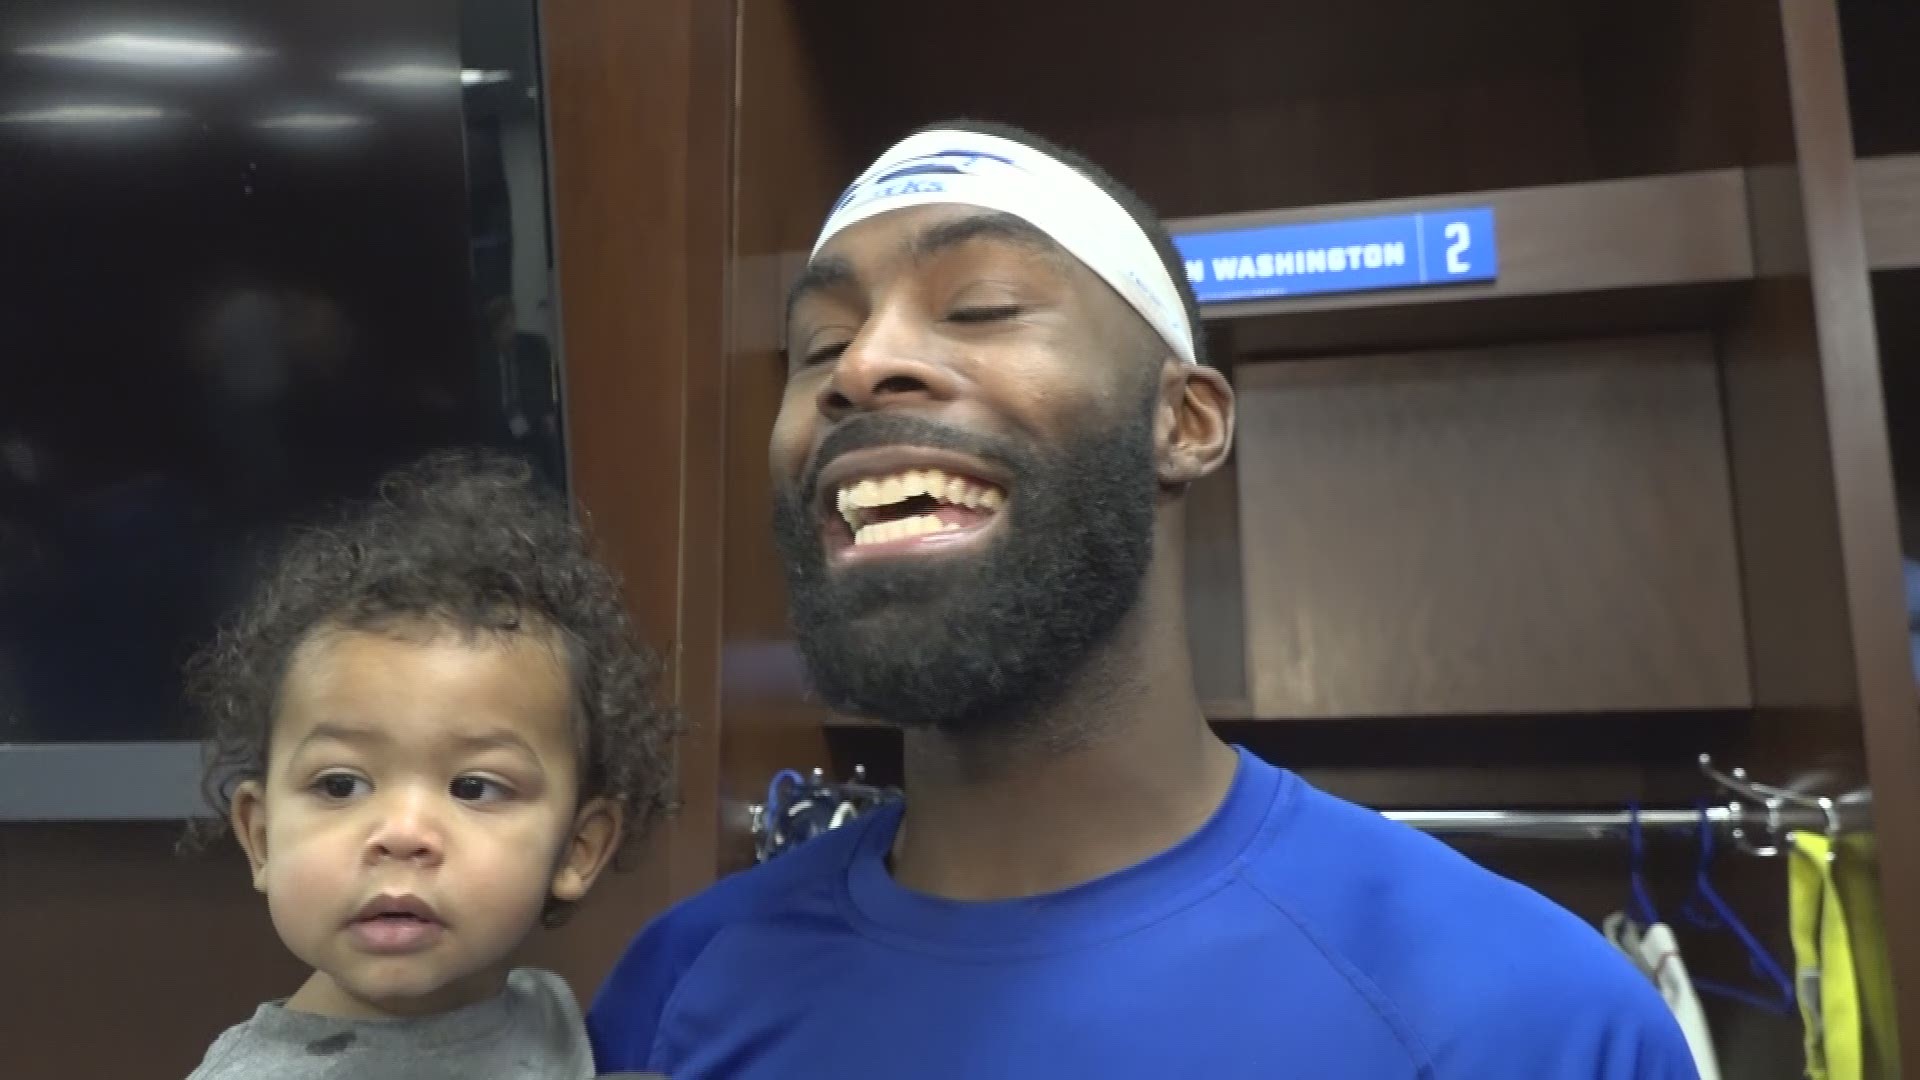 Washington said his son is the reason he came back to football. Now he's making new memories with his little one.